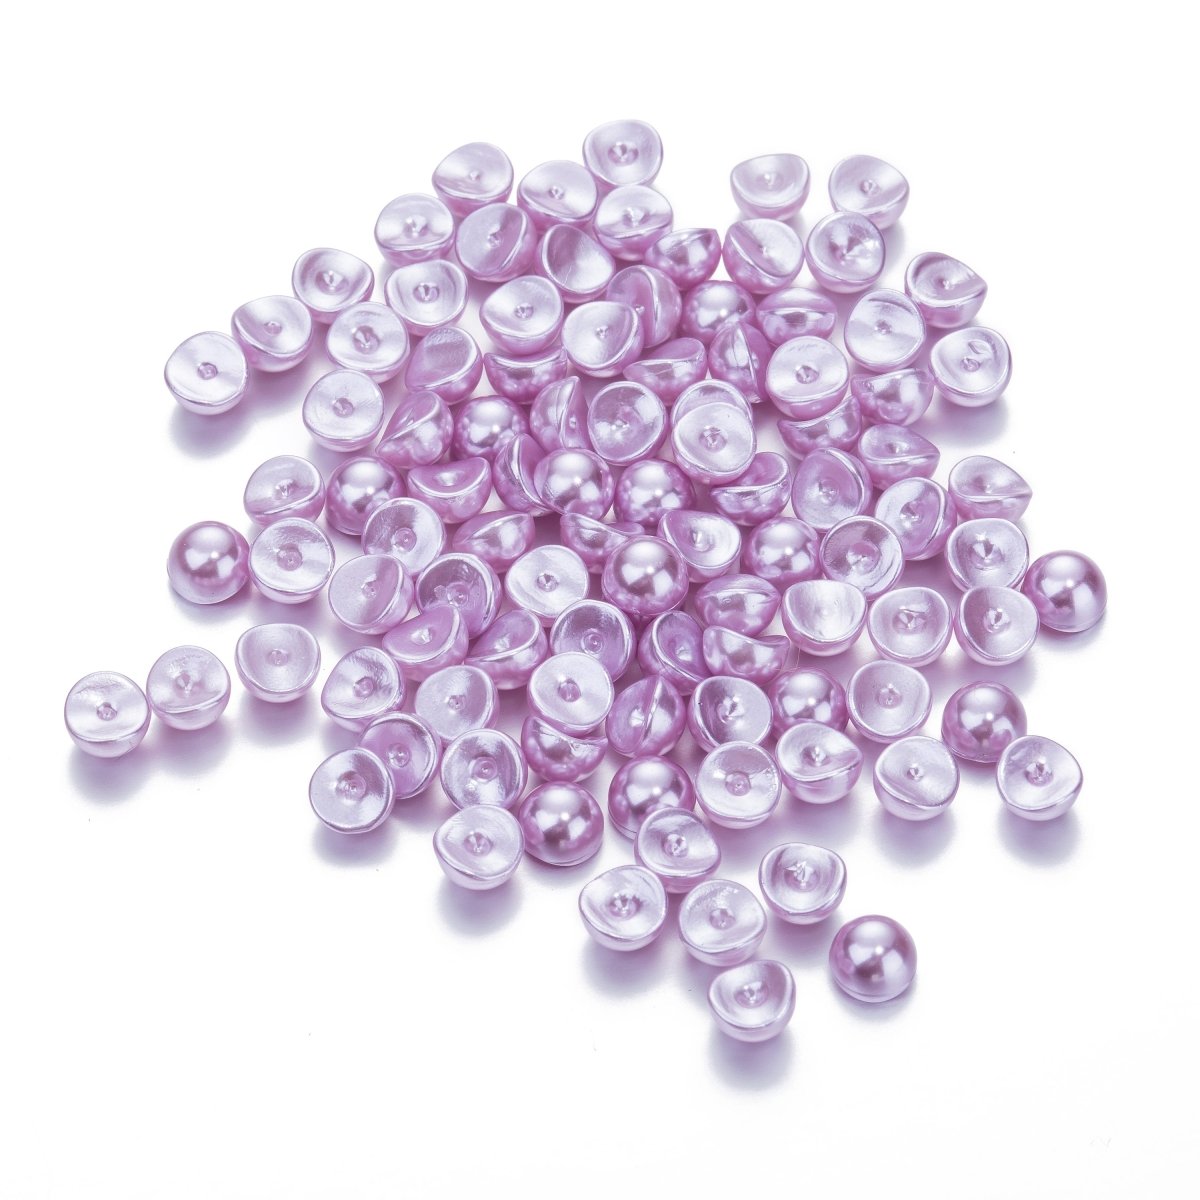 100 pcs Lilac Purple Pearl Flatback Resin Decoden Cabochons, Half Round Pearls, Half Pearl Cabochons, Flat Pearl Size 6mm for embellishments, 04.30-9734 - DLUXCA